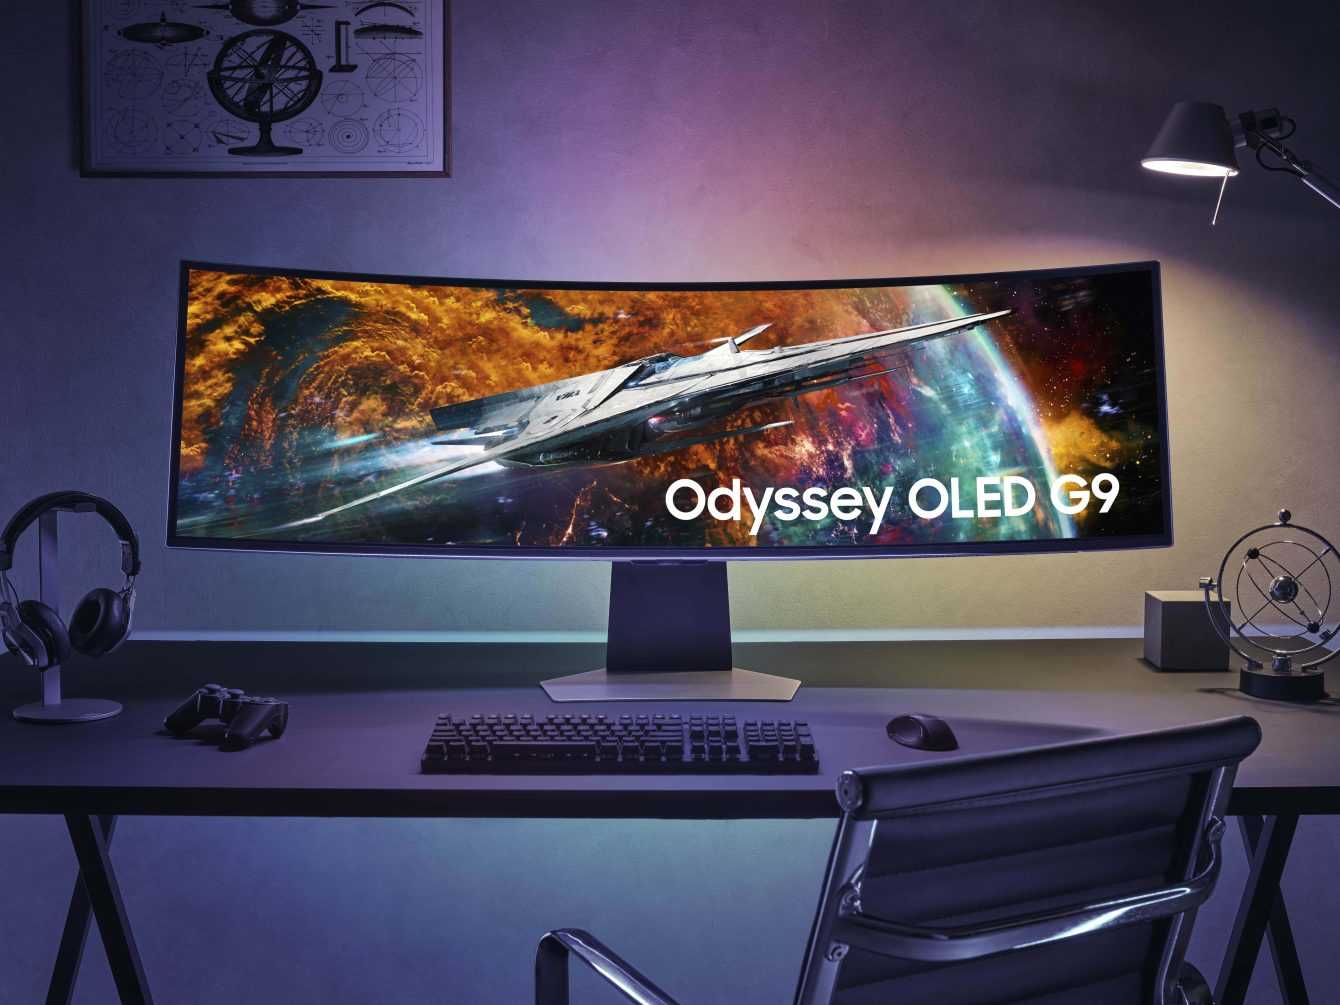 Samsung: Ushering in the new era of gaming with the launch of the Odyssey OLED G9